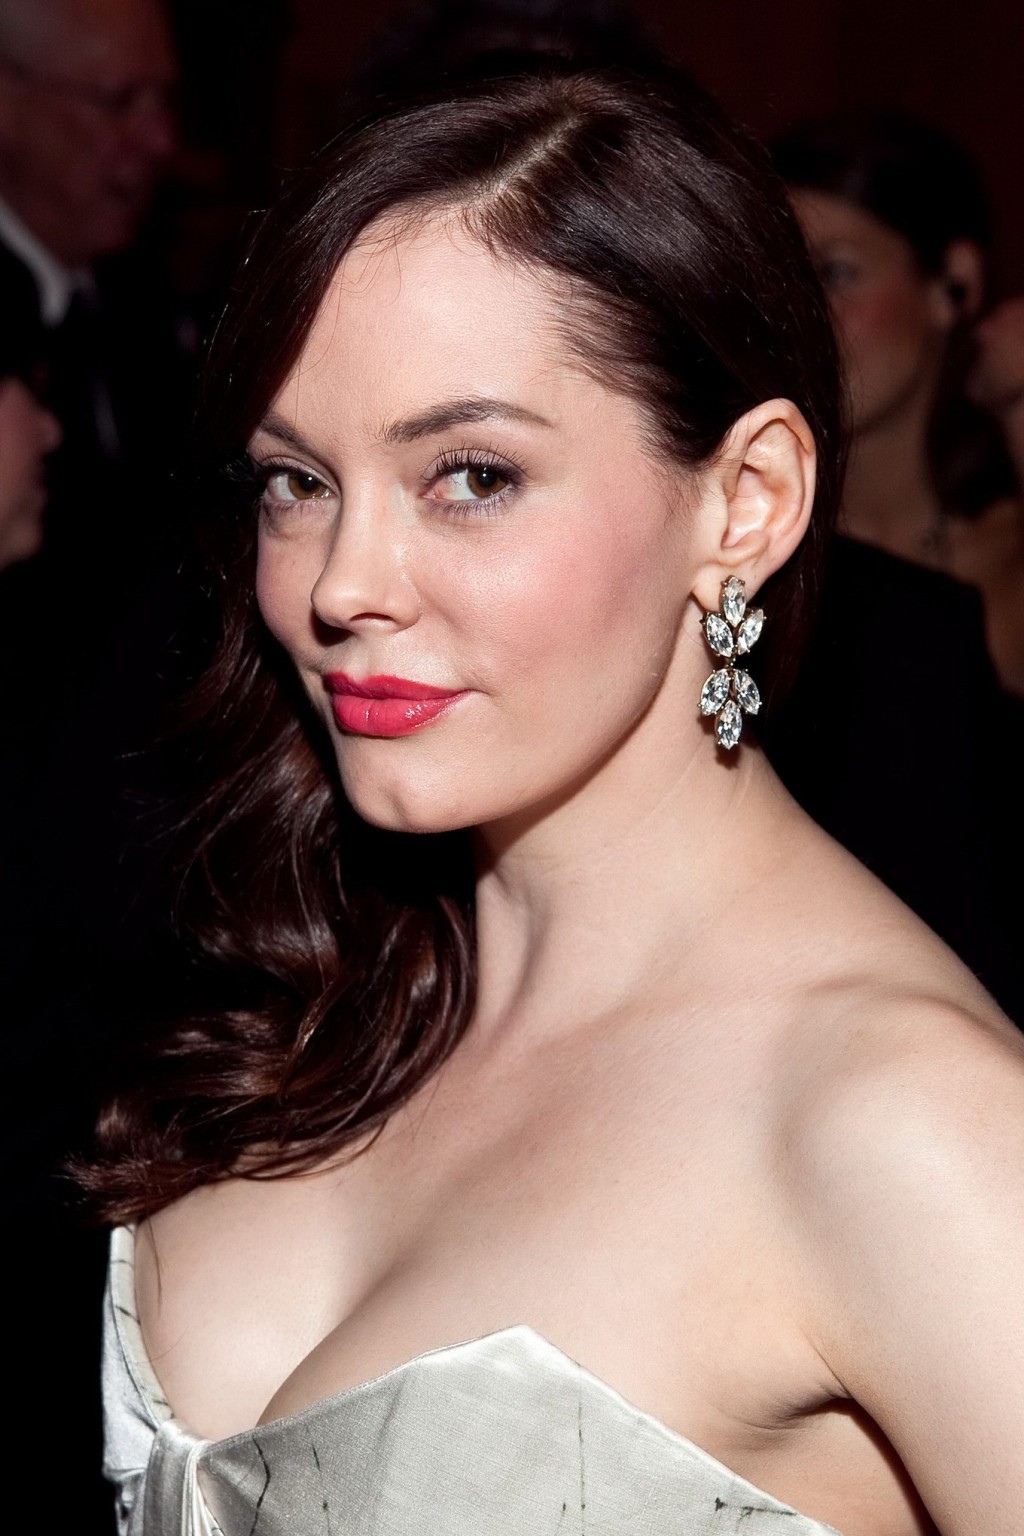 Rose McGowan showing massive cleavage in strapless dress at USO Gala in Washingt #75330169